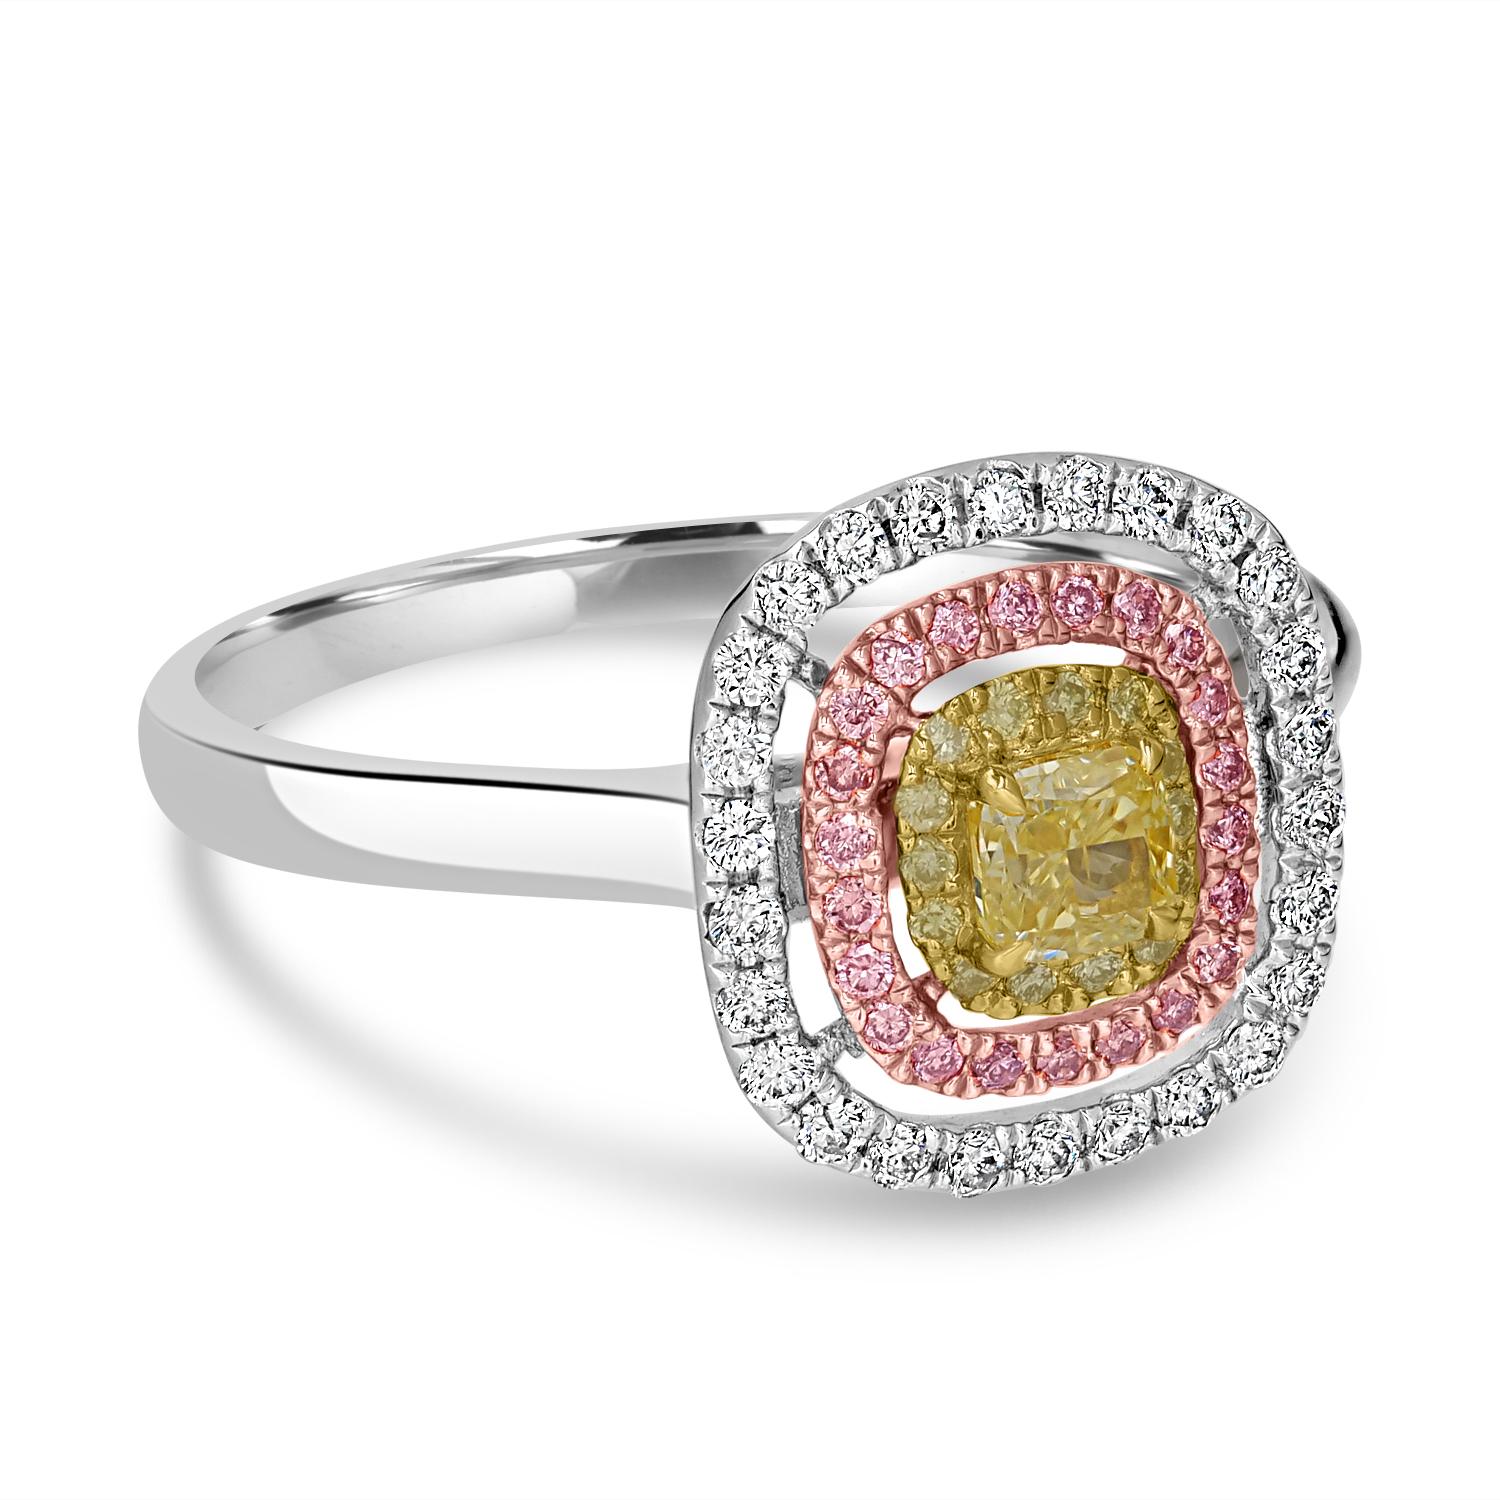 Cushion Cut 0.27 Carat Yellow Diamond Solitaire with Yellow, Pink and White Diamond Halos